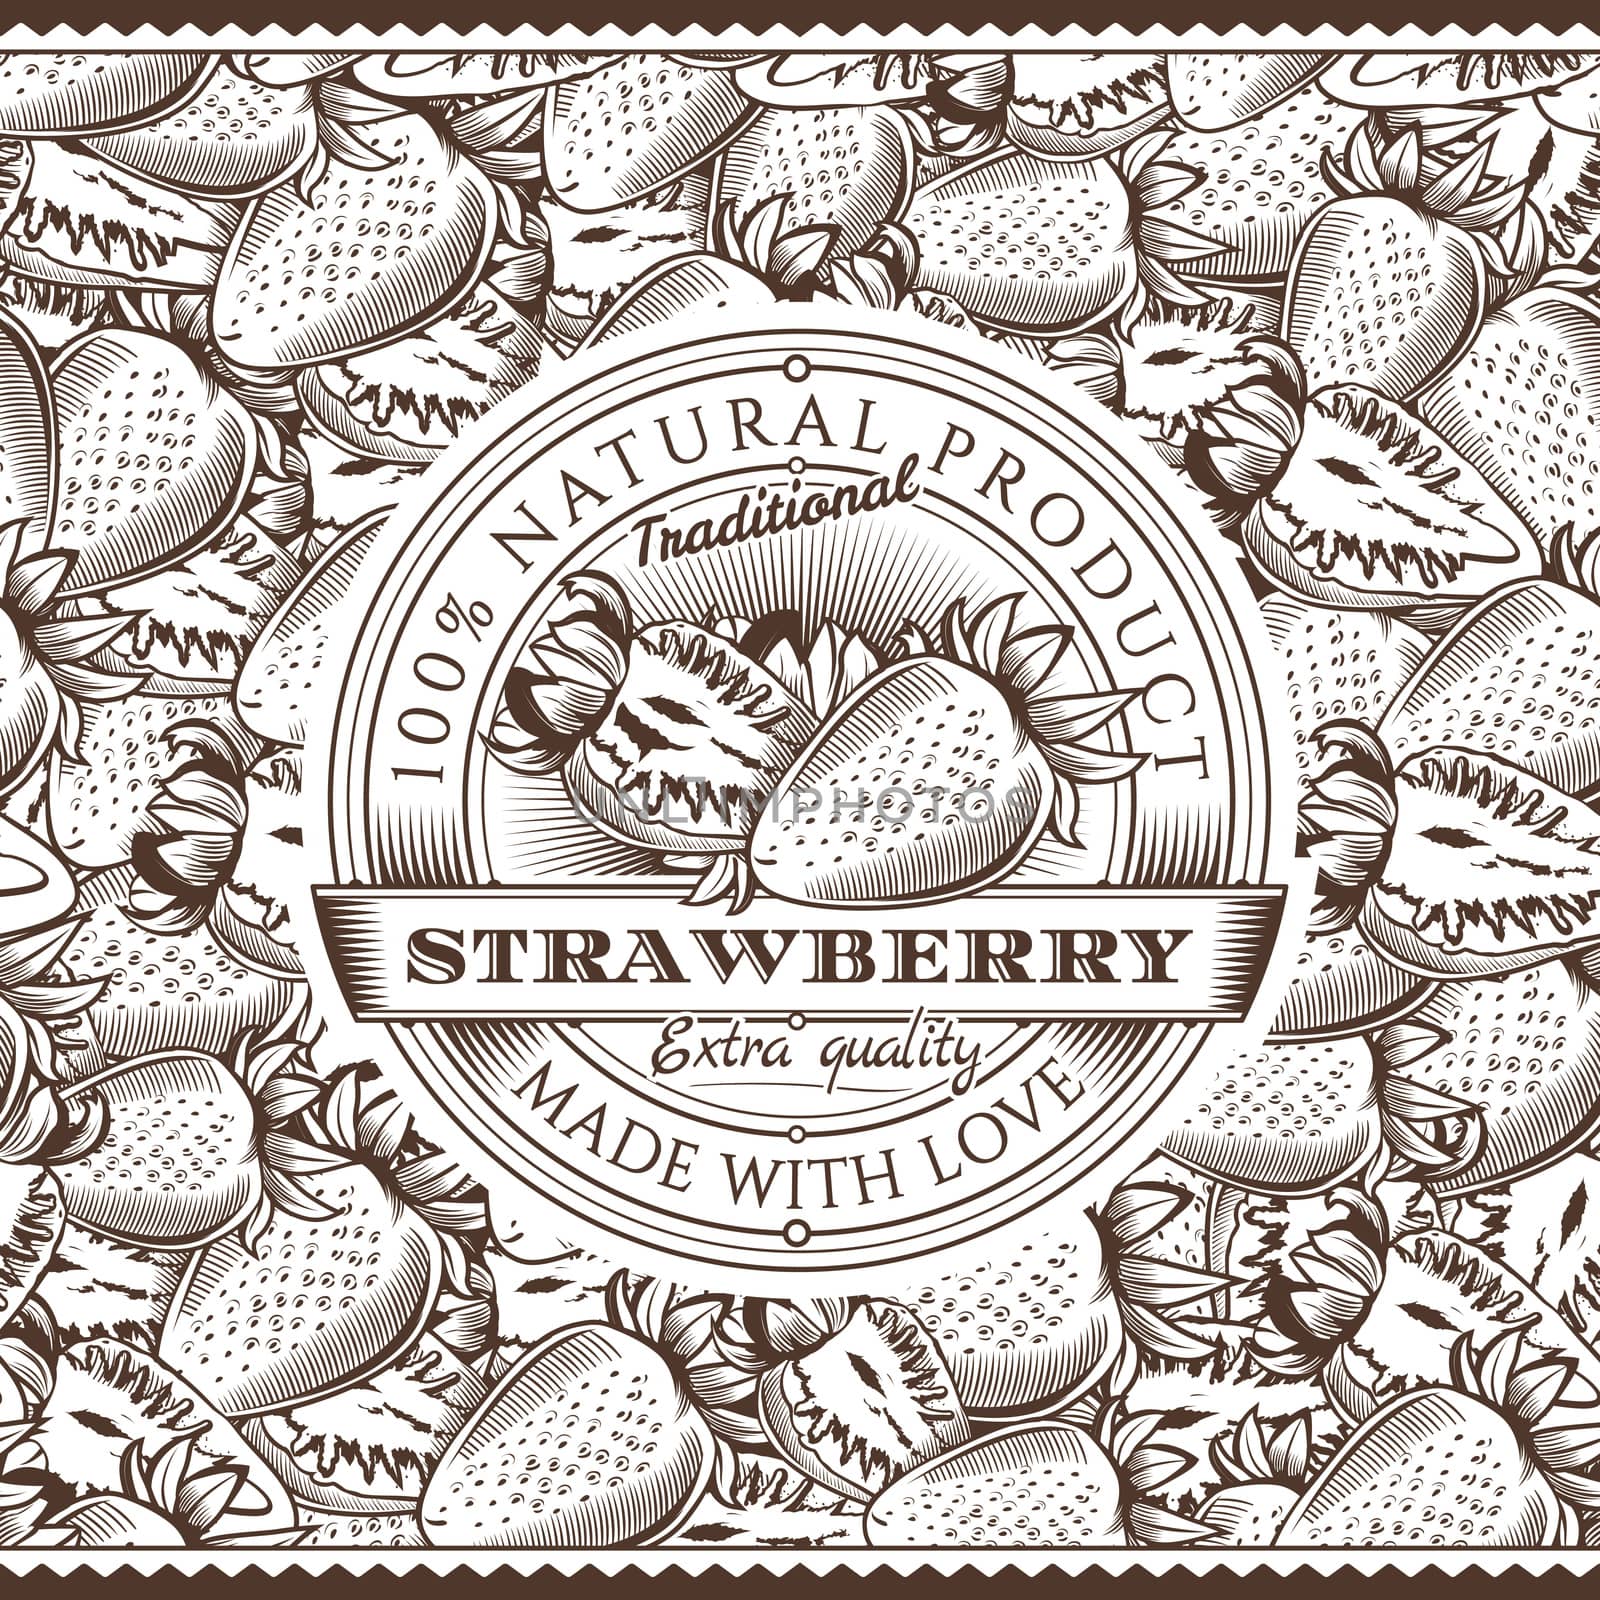 Vintage Strawberry Label On Seamless Pattern by ConceptCafe